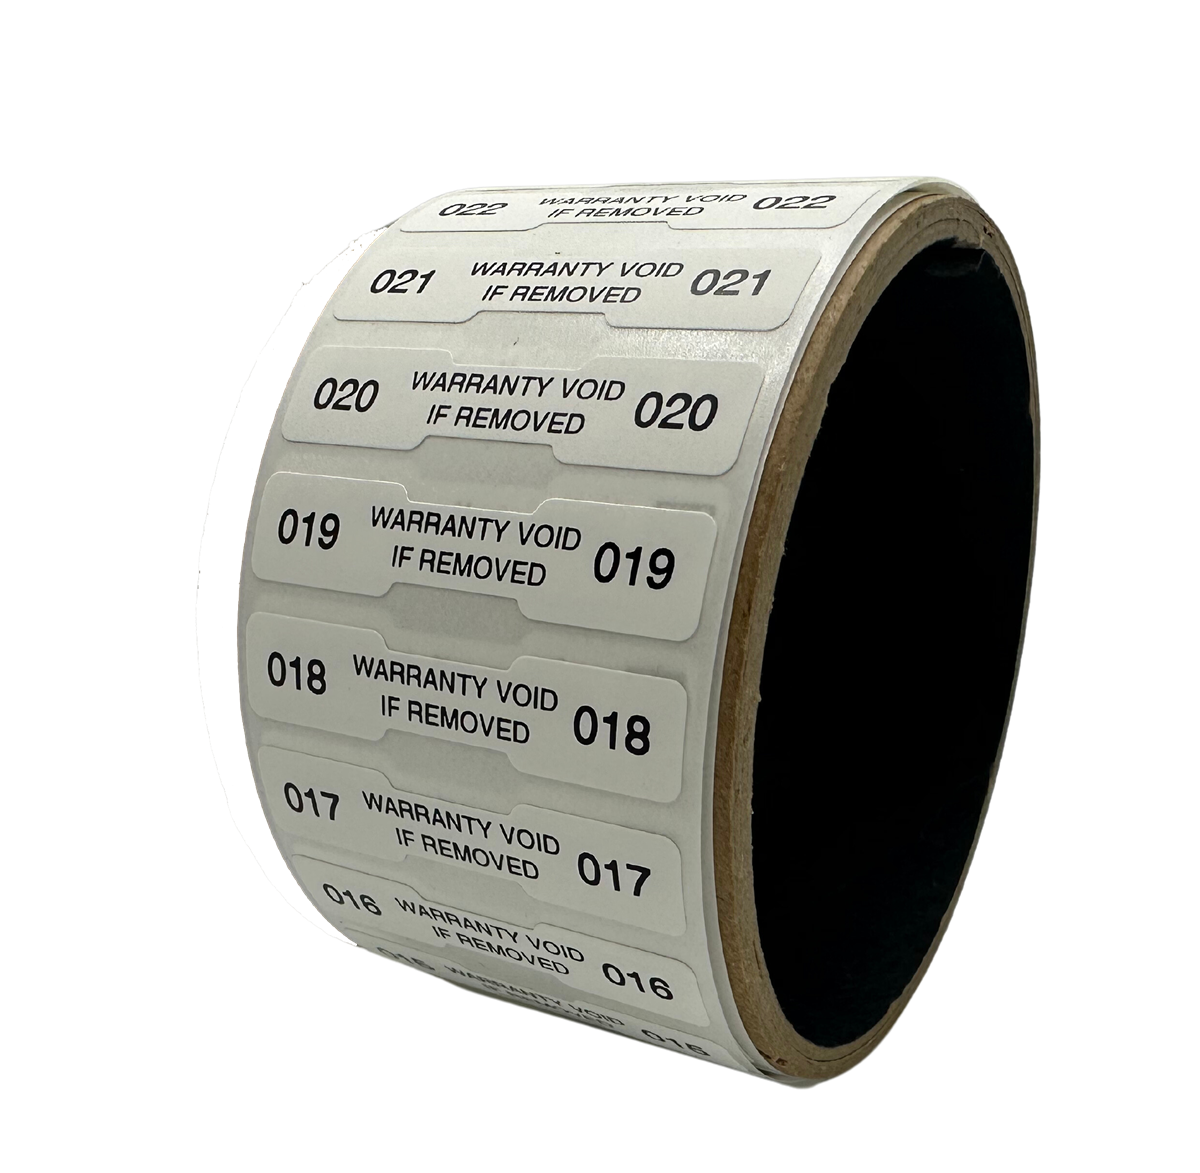 5,000 TamperVoidPro® White Tamper Evident Security Labels Seal Sticker, Dogbone Shape Size 1.75" x 0.375 (44mm x 9mm). Printed: Warranty Void if Label Removed + Serialization.